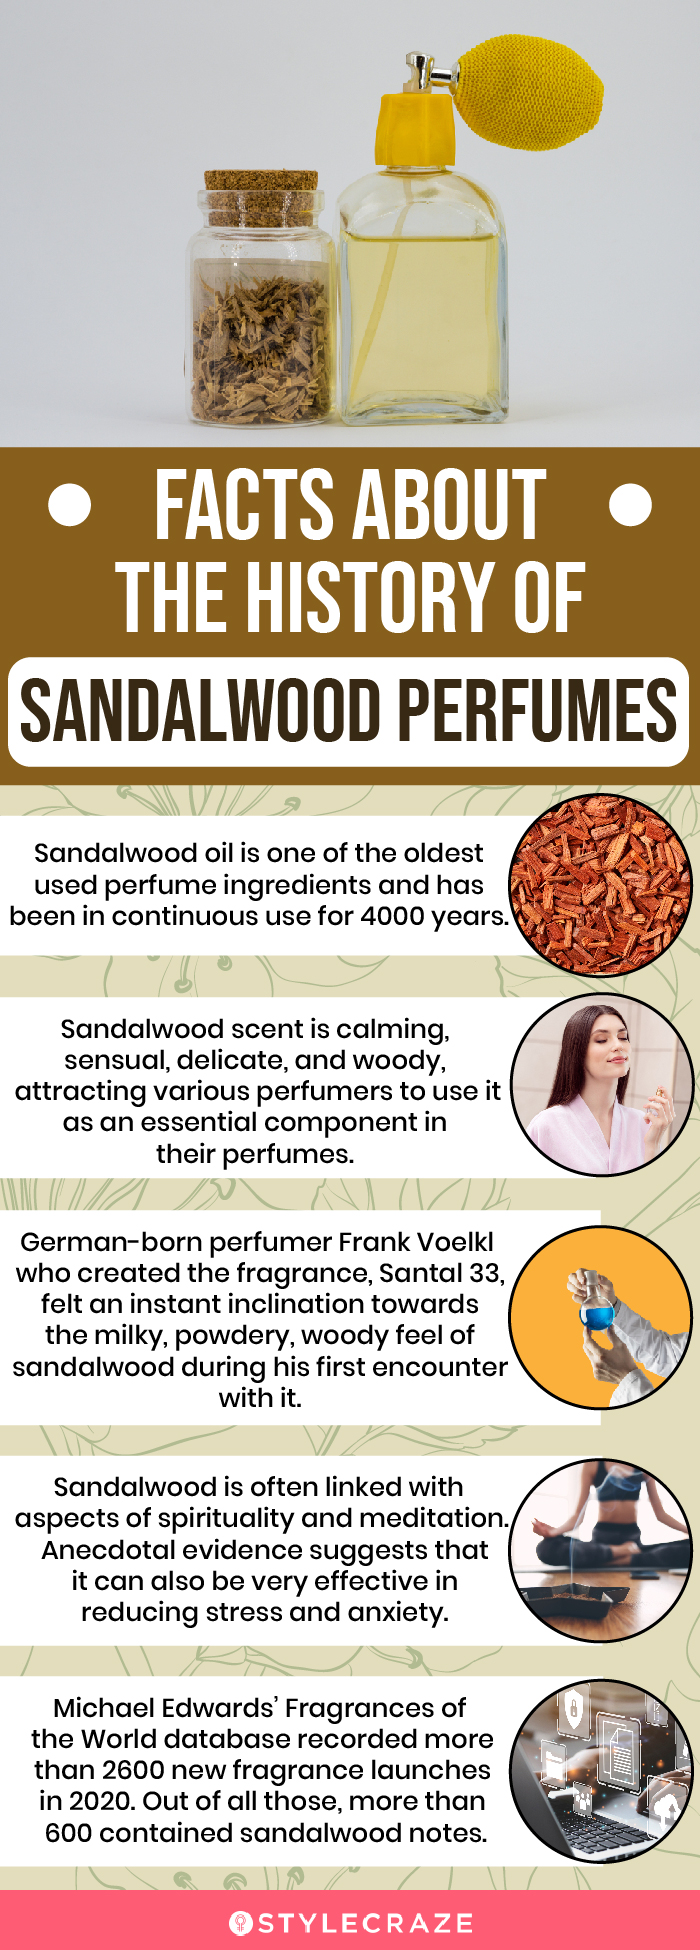 Facts About The History Of Sandalwood Perfumes (infographic)